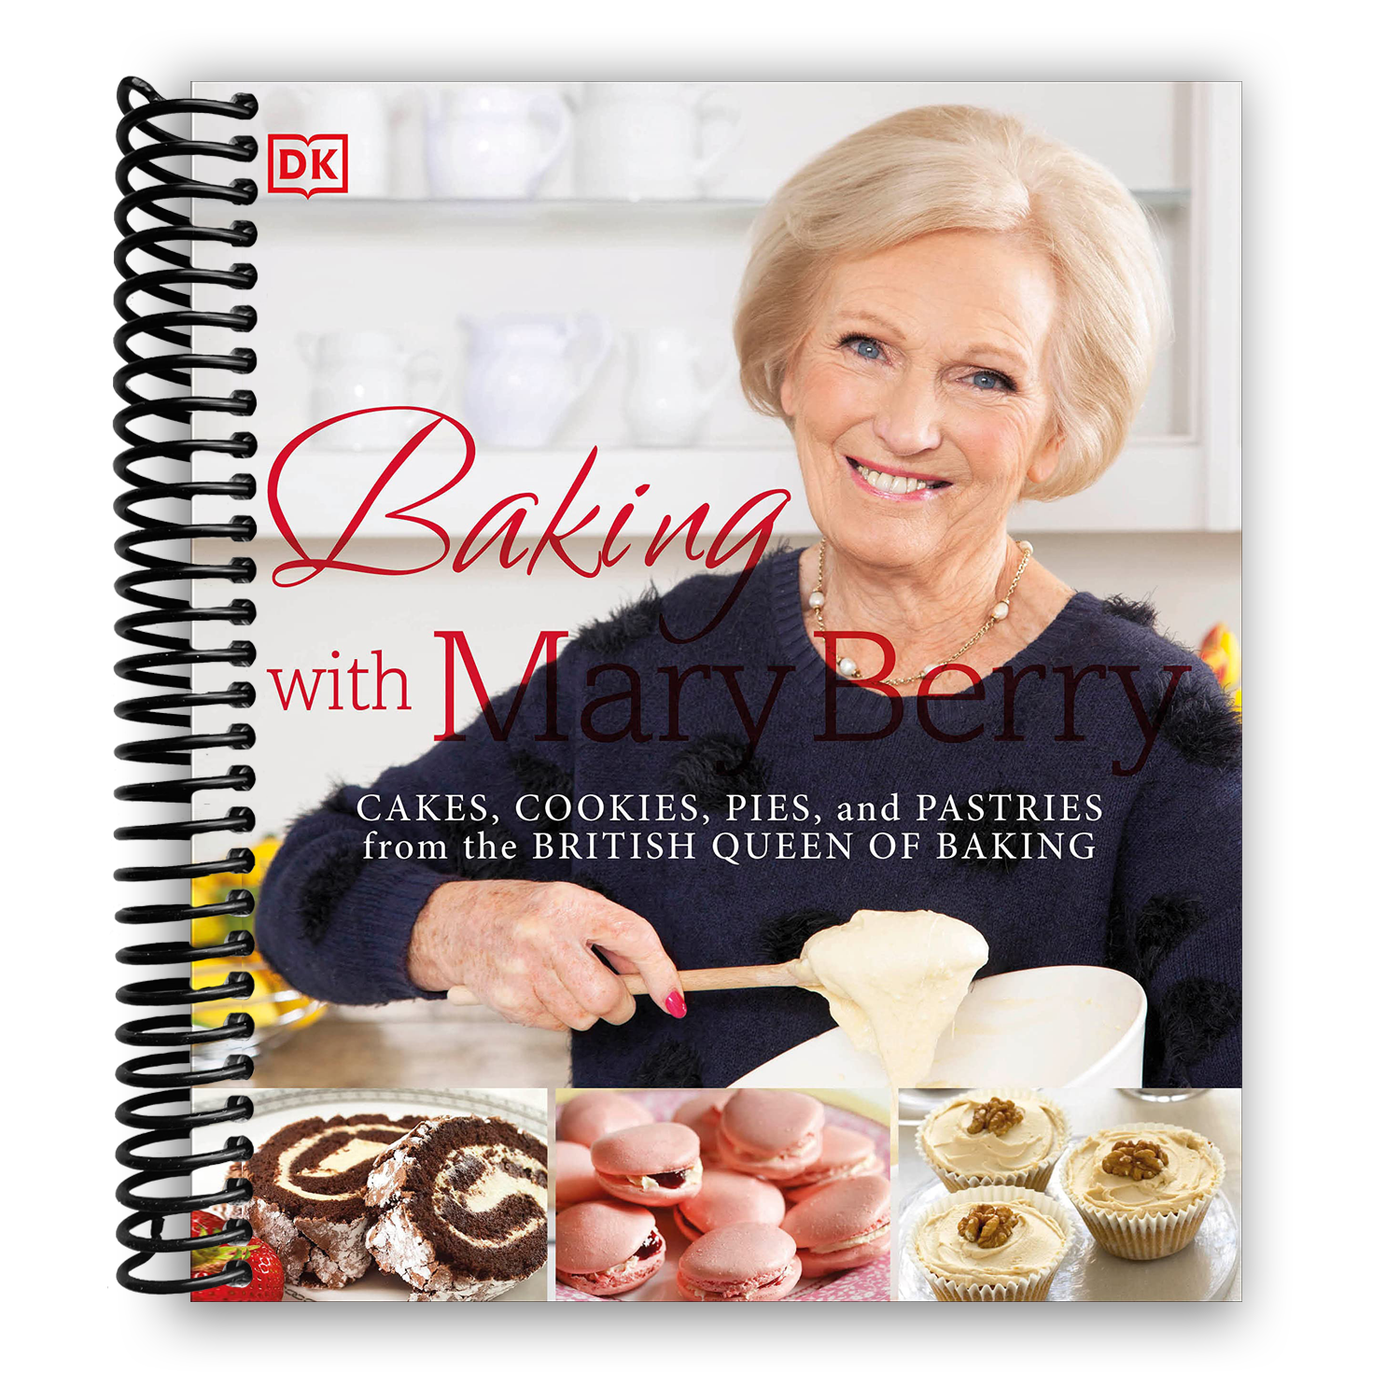 Baking with Mary Berry: Cakes, Cookies, Pies, and Pastries from the British Queen of Baking (Spiral Bound)